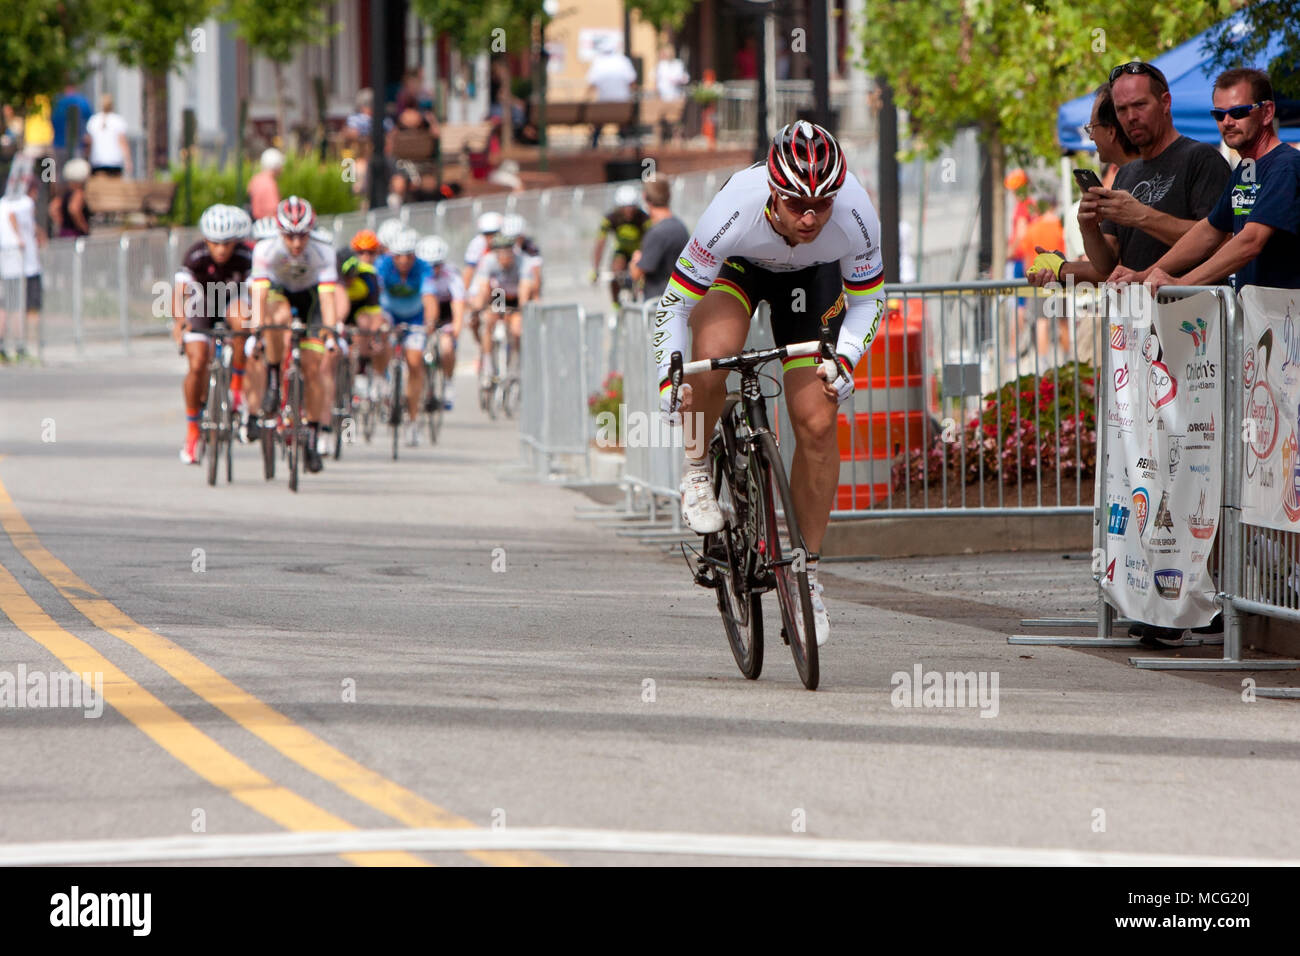 Duluth, GA, USA - August 2, 2014:  A male cyclist separates himself from a group of racers competing in the Georgia Cup Criterium event. Stock Photo